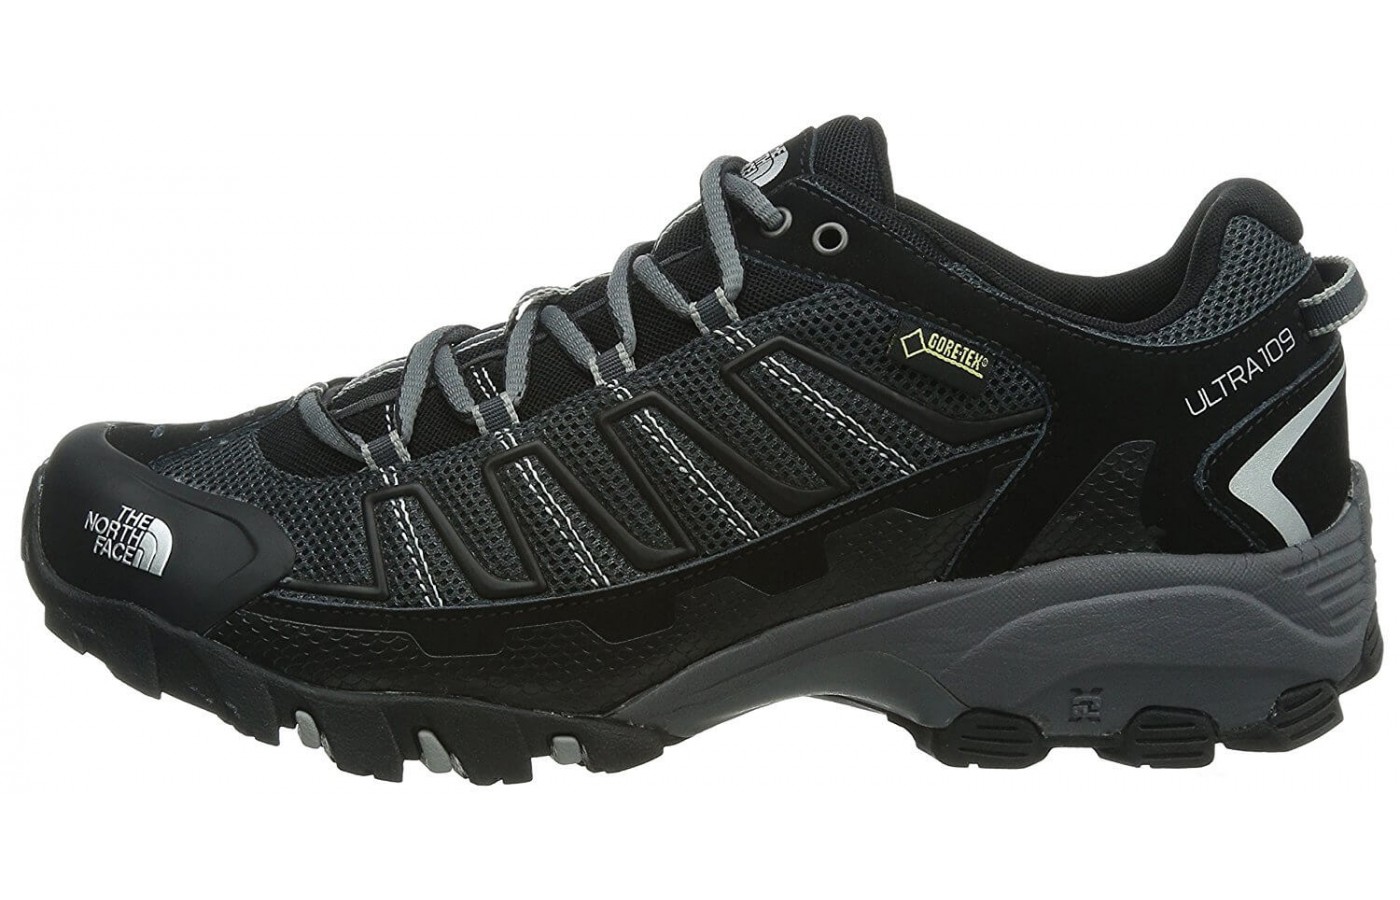 The The North Face Ultra 110 GTX has an ESS rock plate for protection